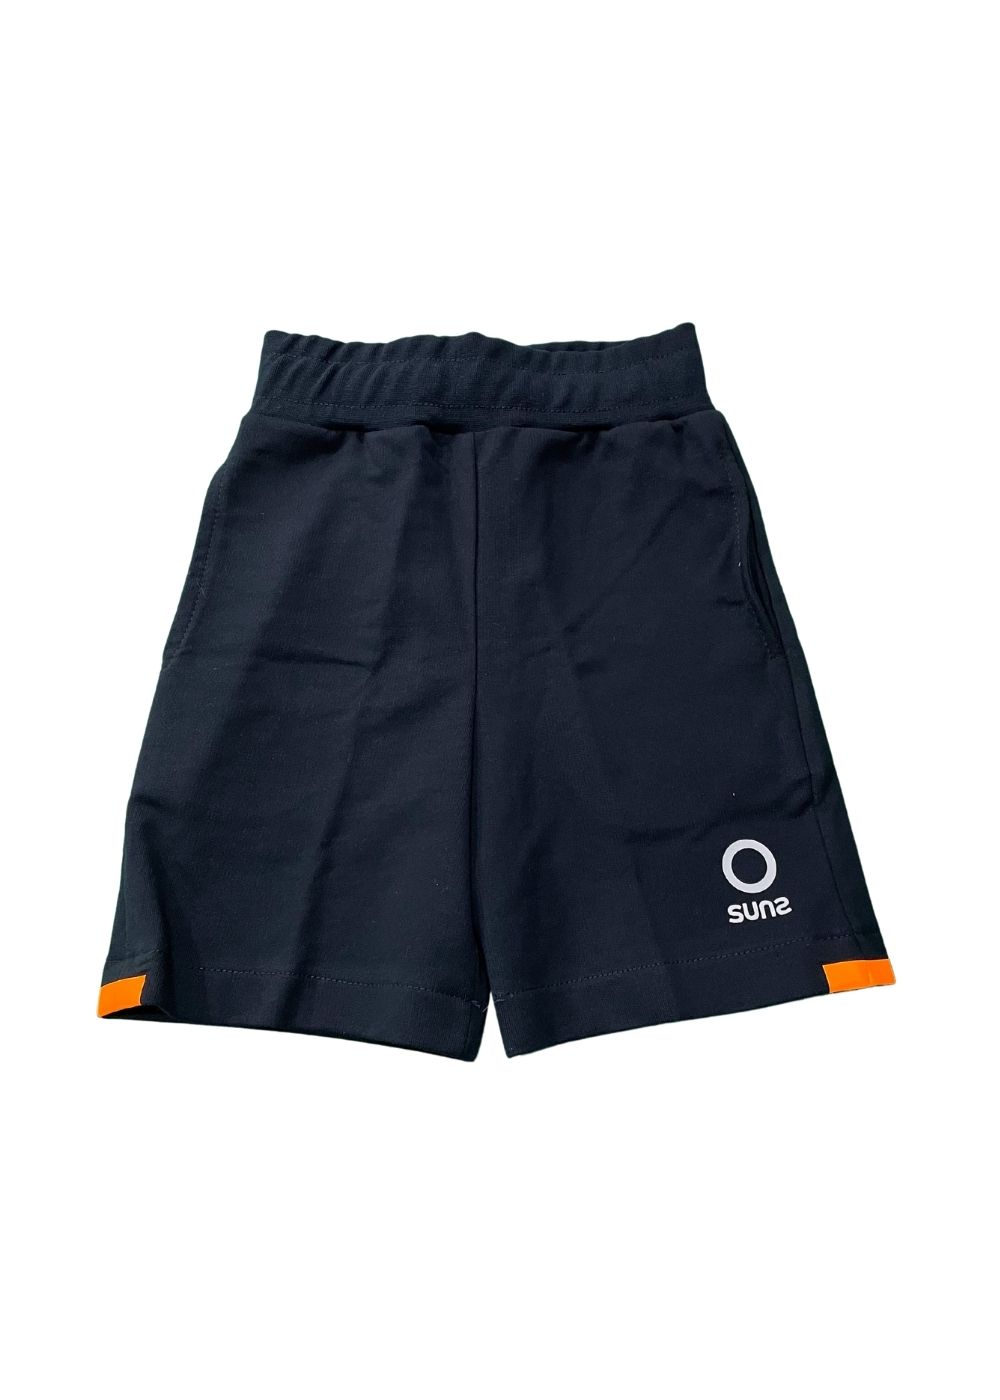 Featured image for “SUNS SHORTS BLU LOGO”